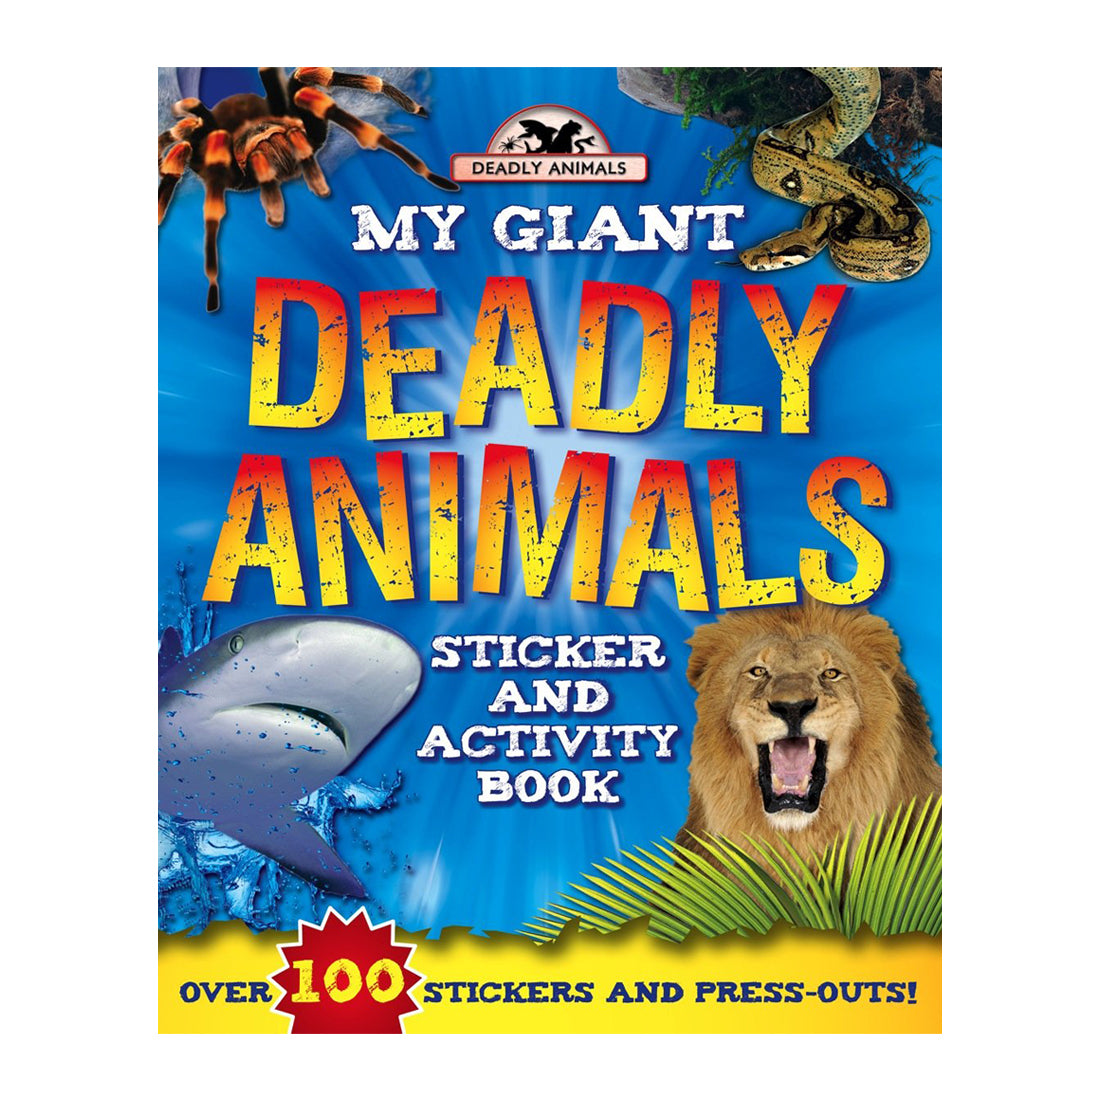 My Giant Deadly Animals Sticker and Activity